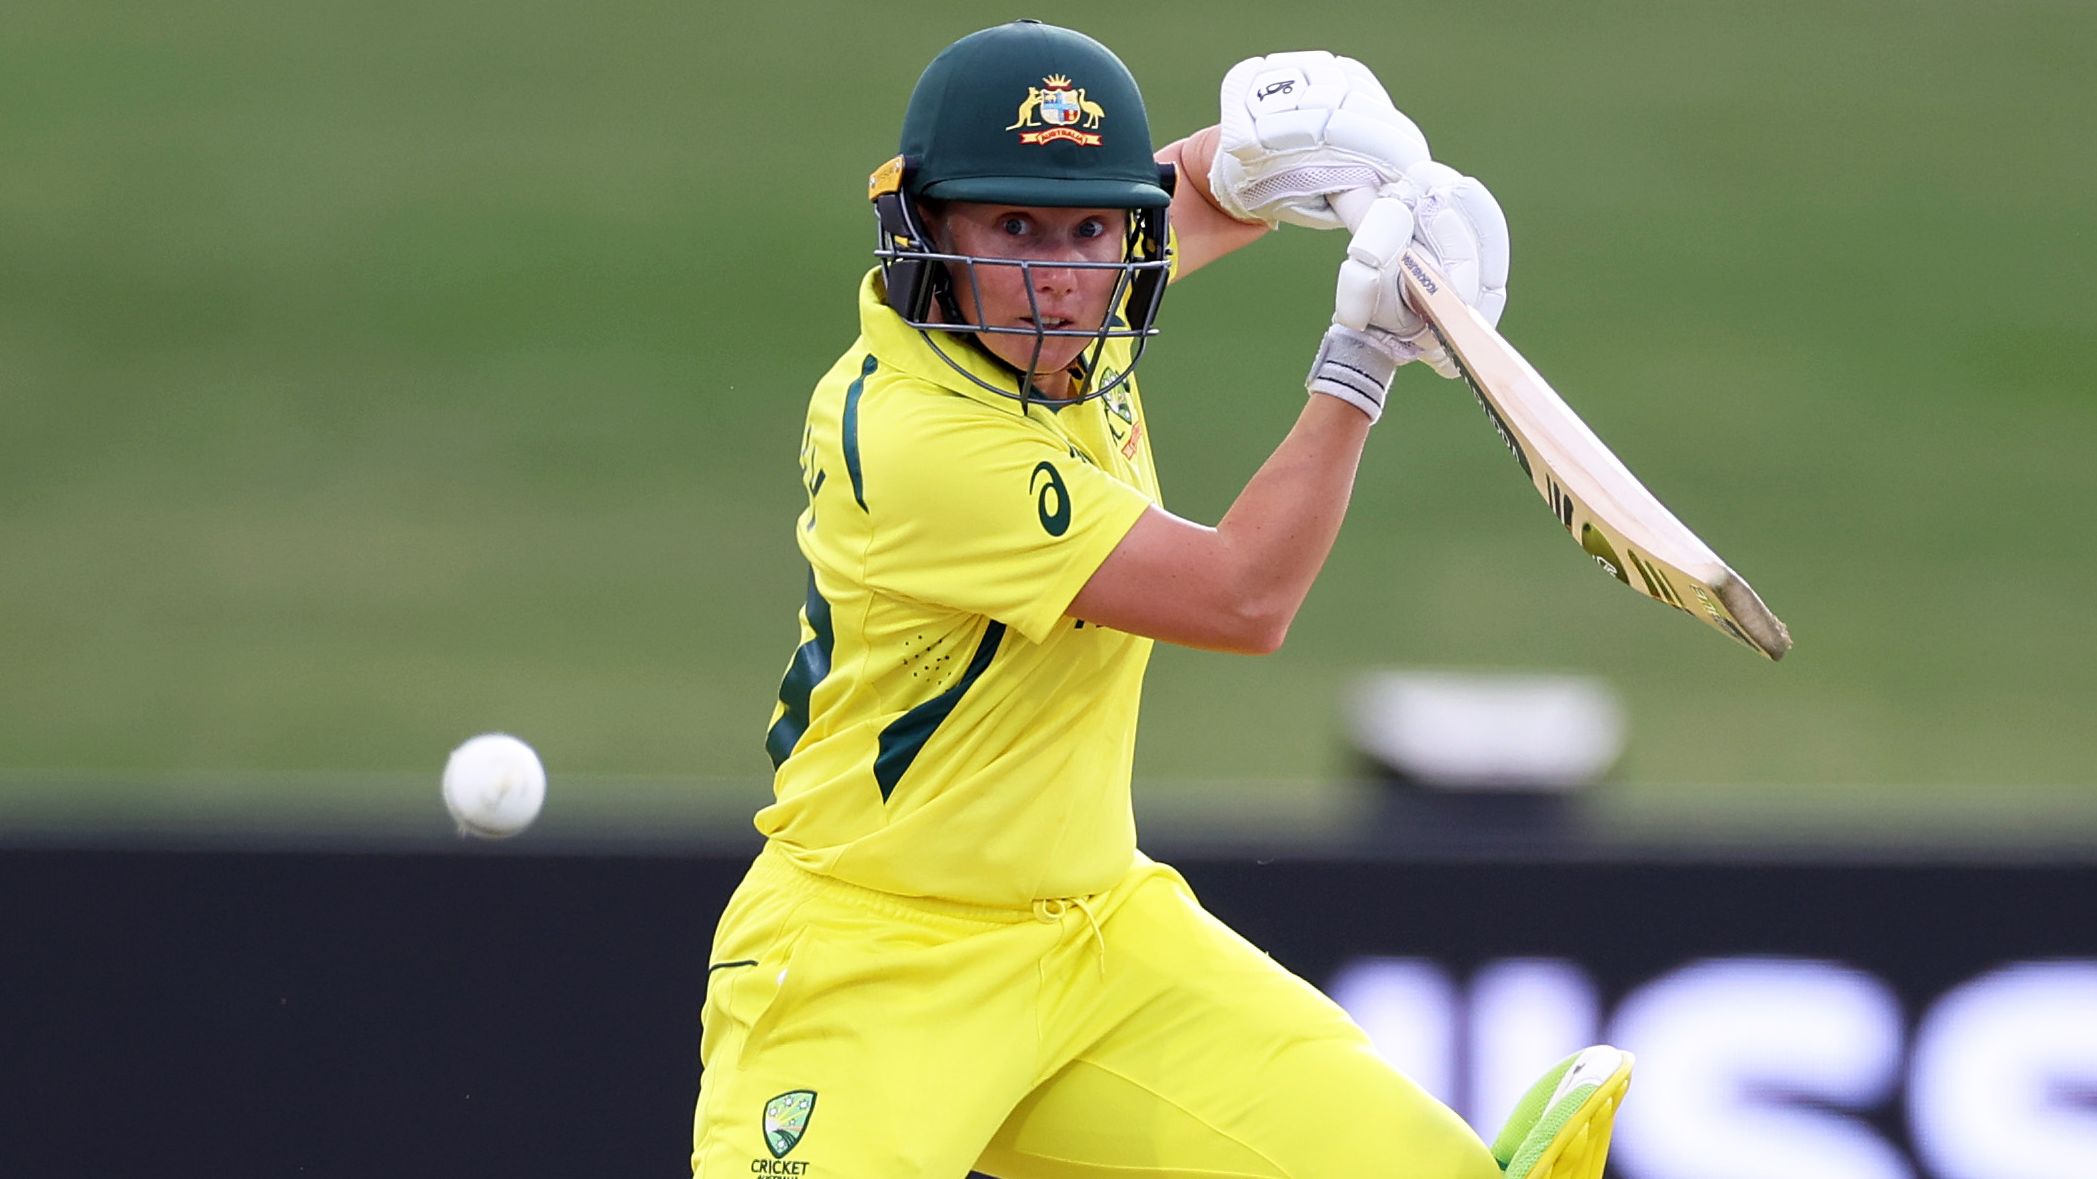 Alyssa Healy blasts Pakistan into submission as Aussies continue winning ways at World Cup